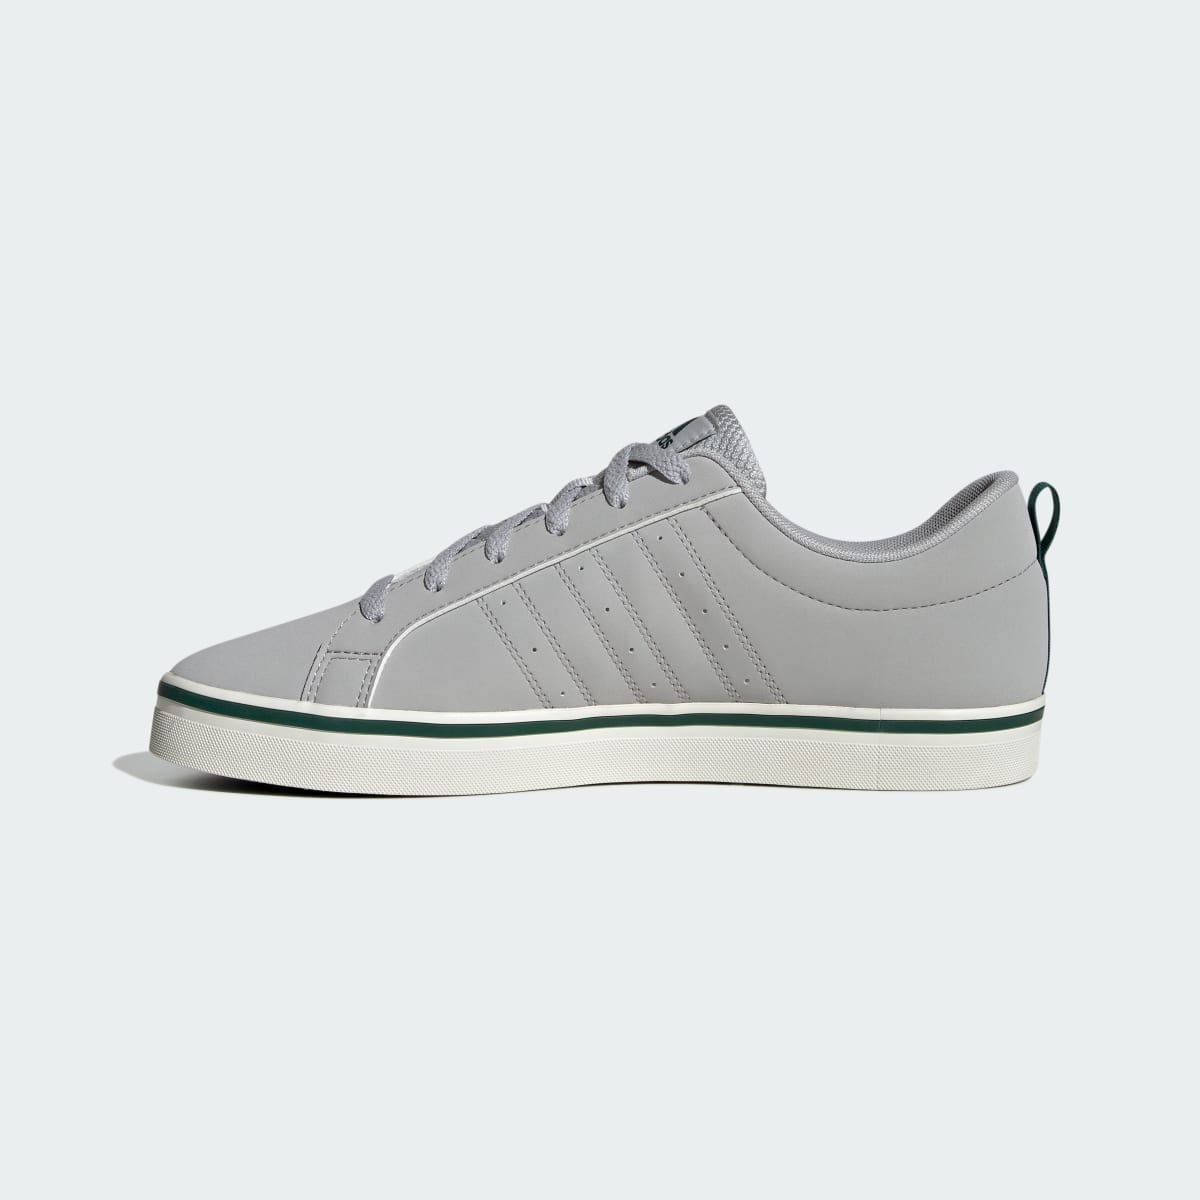 Adidas VS Pace 2.0 Lifestyle Skateboarding Shoes. 7